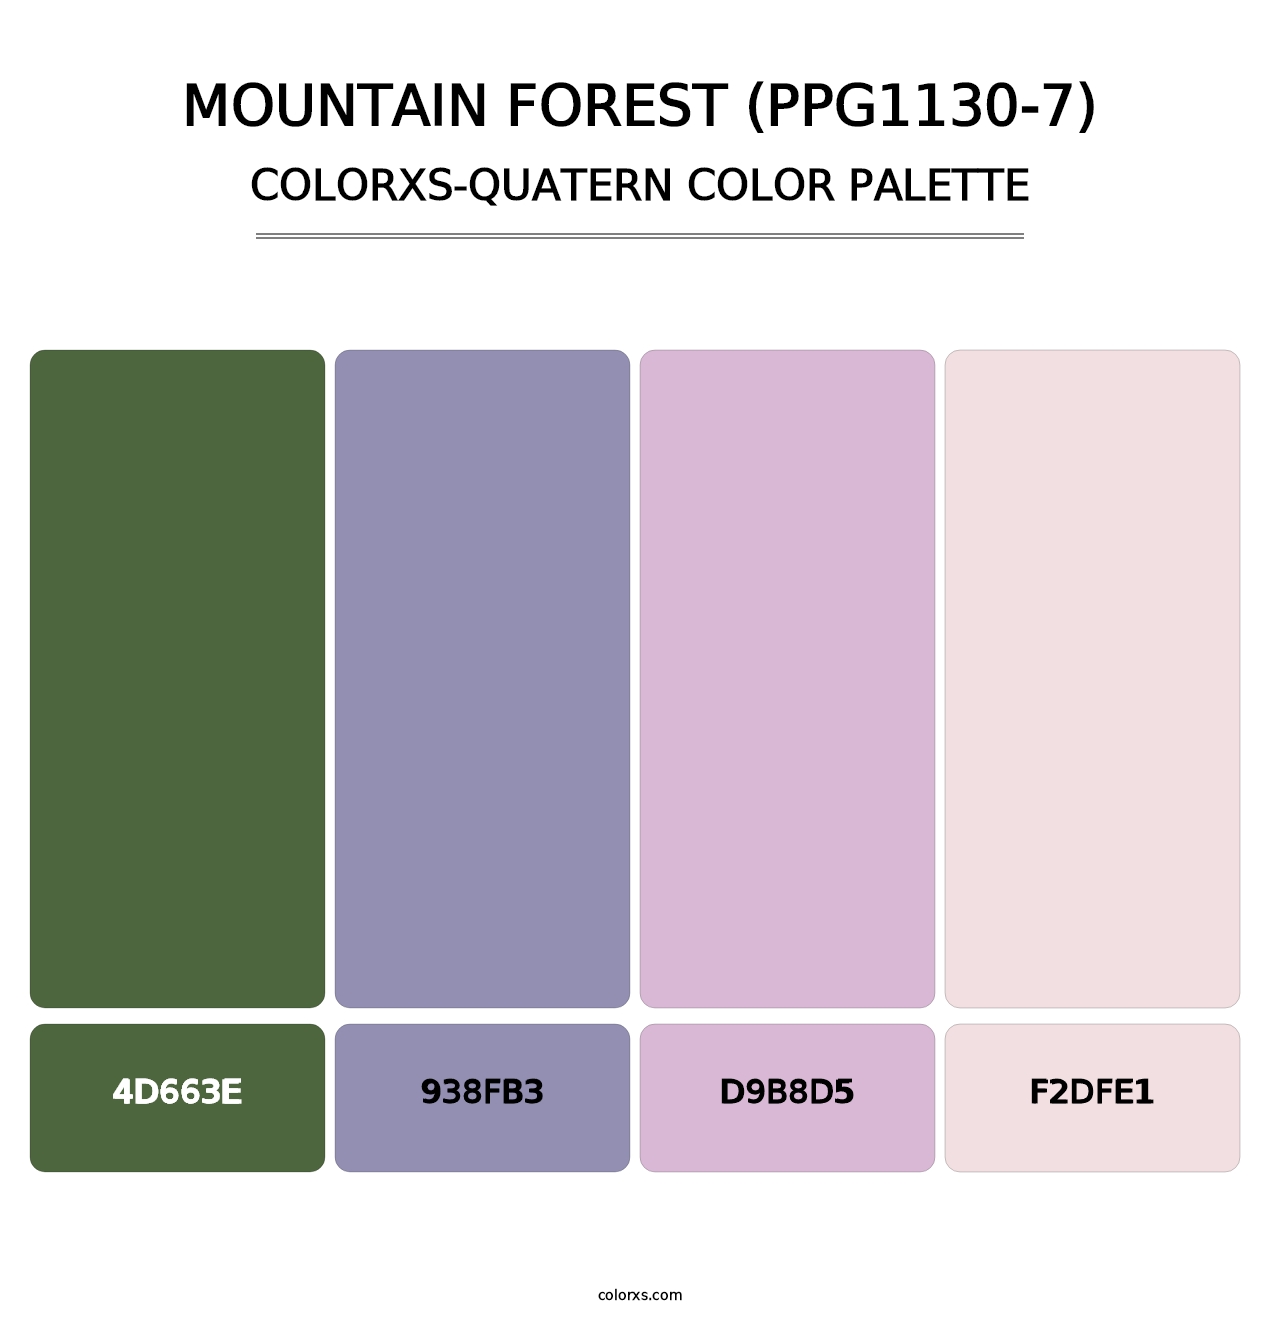 Mountain Forest (PPG1130-7) - Colorxs Quatern Palette